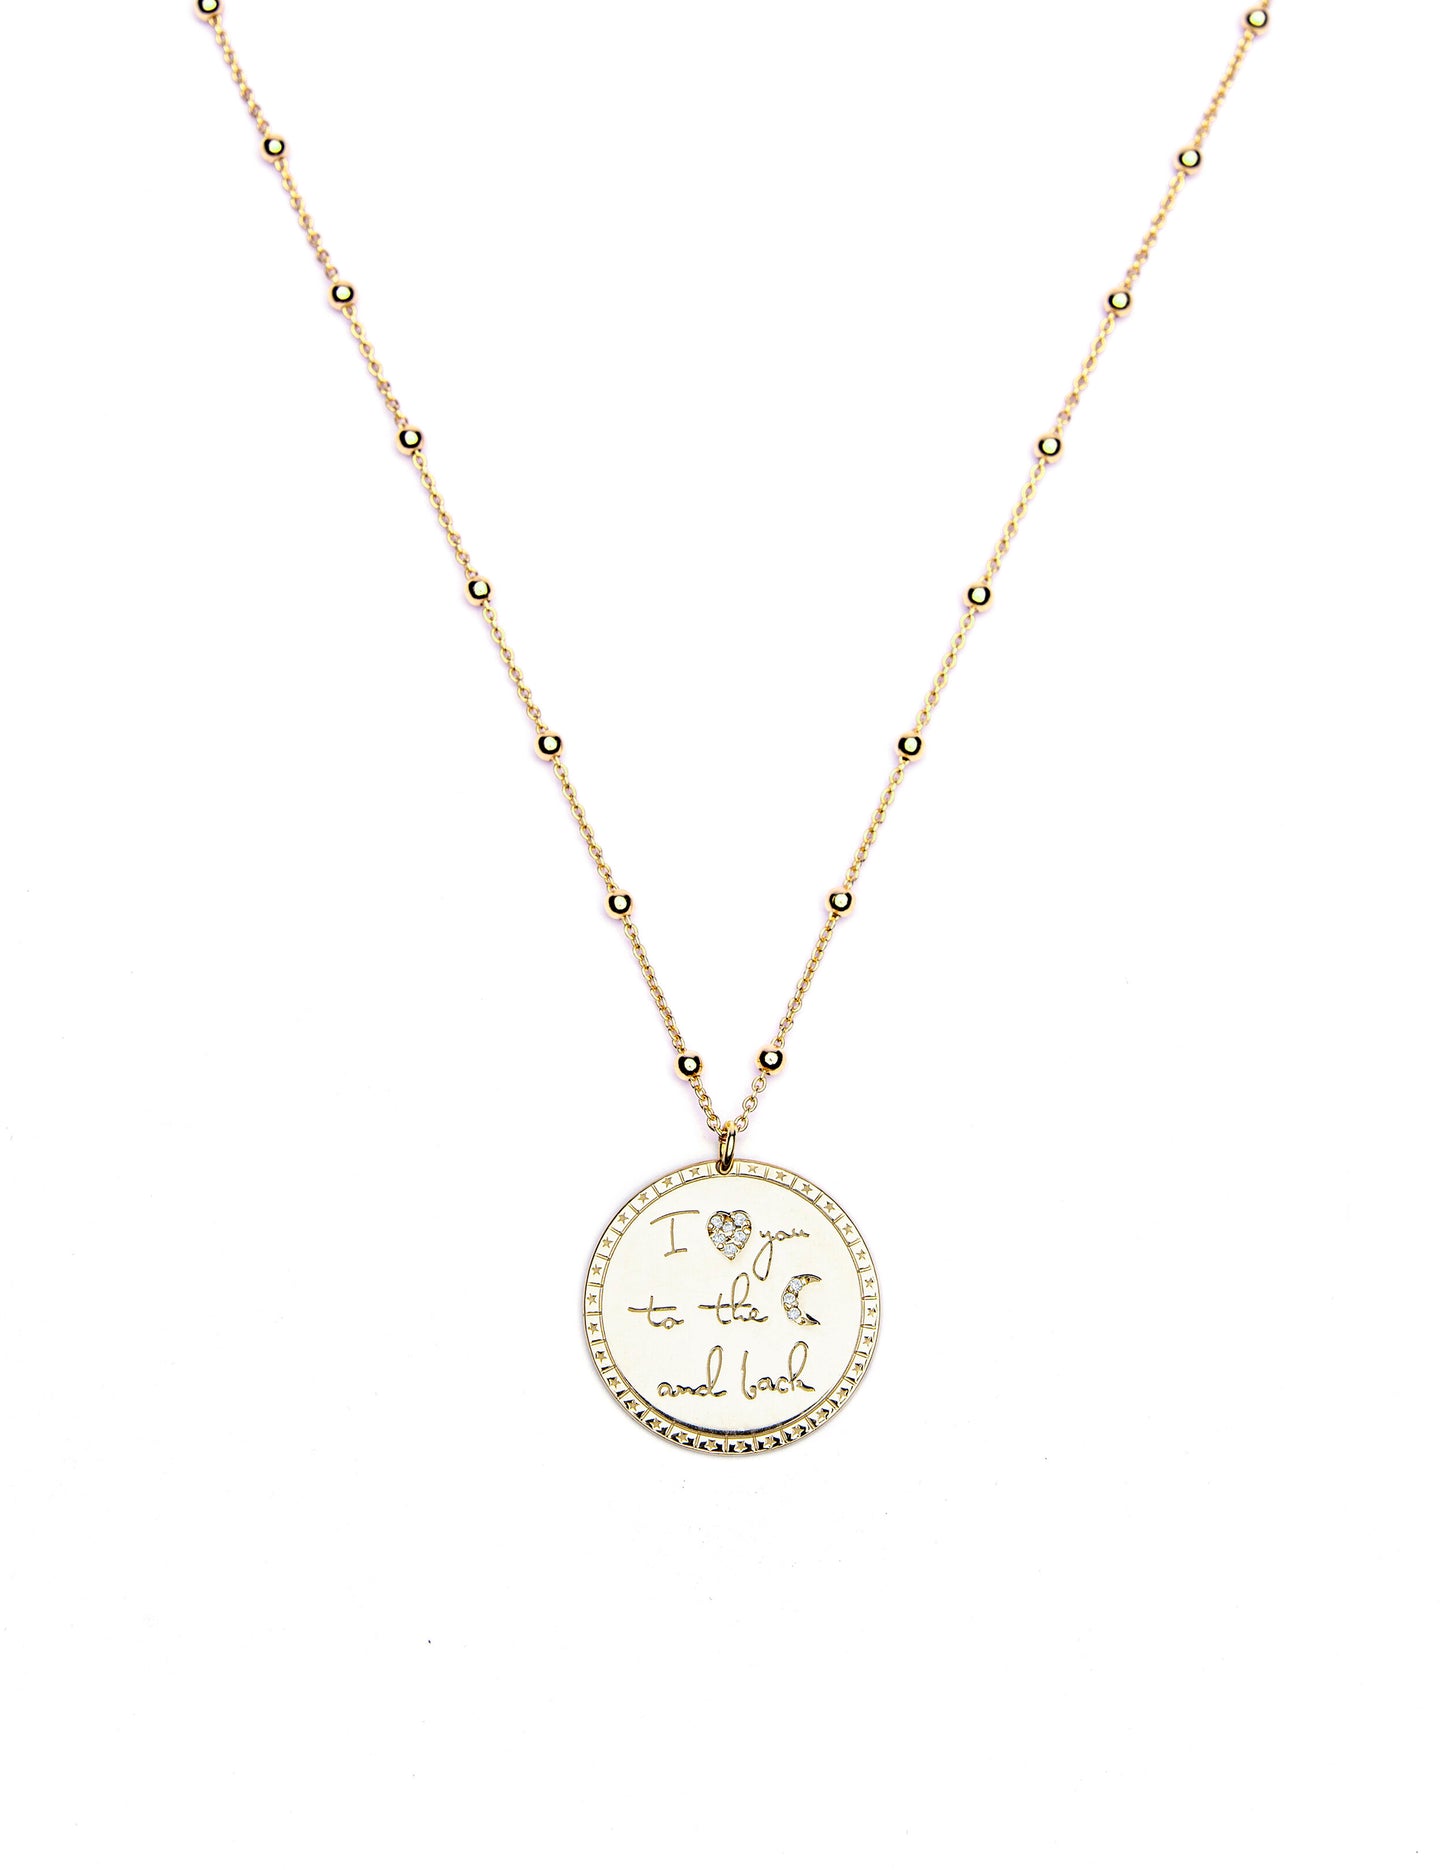 I Love you to the moon and back Necklace - Gold Plated